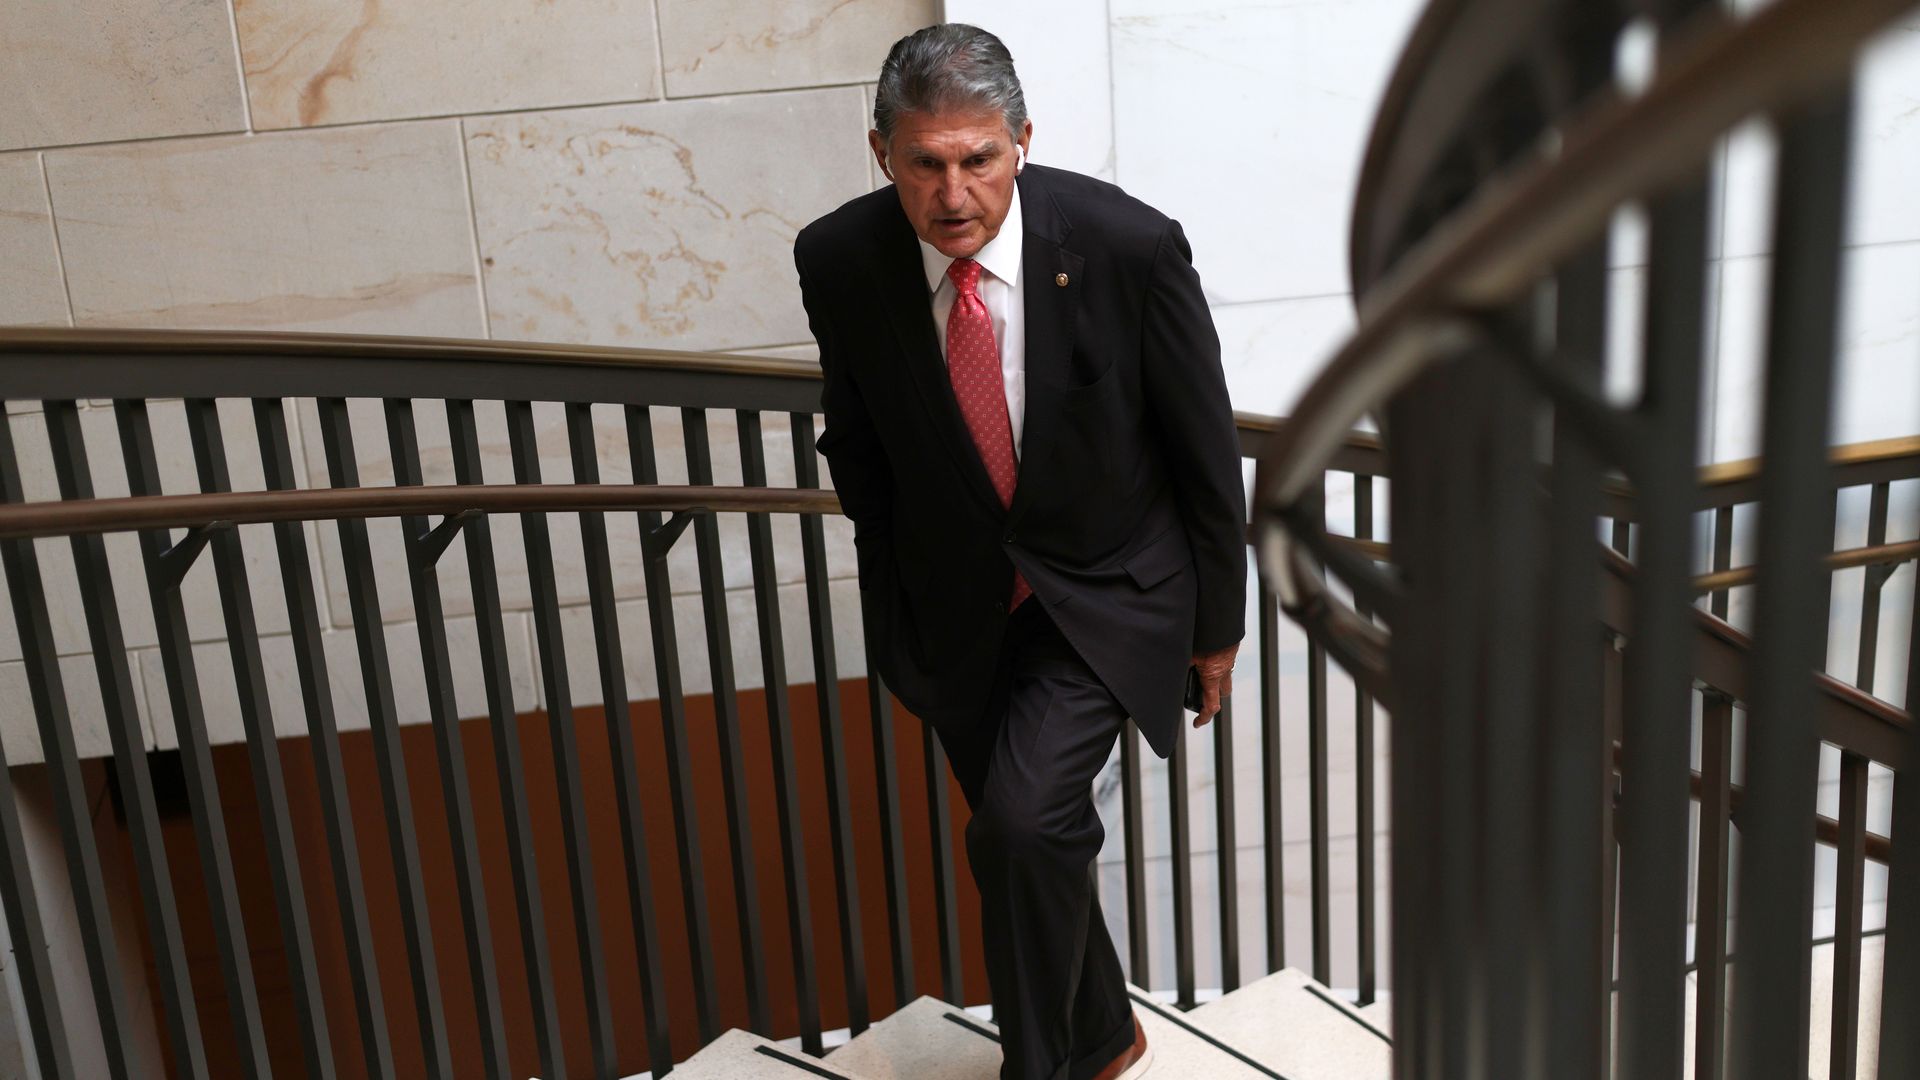 Sen. Joe Manchin is seen walking up a staircase in the Capitol Visitor Center.